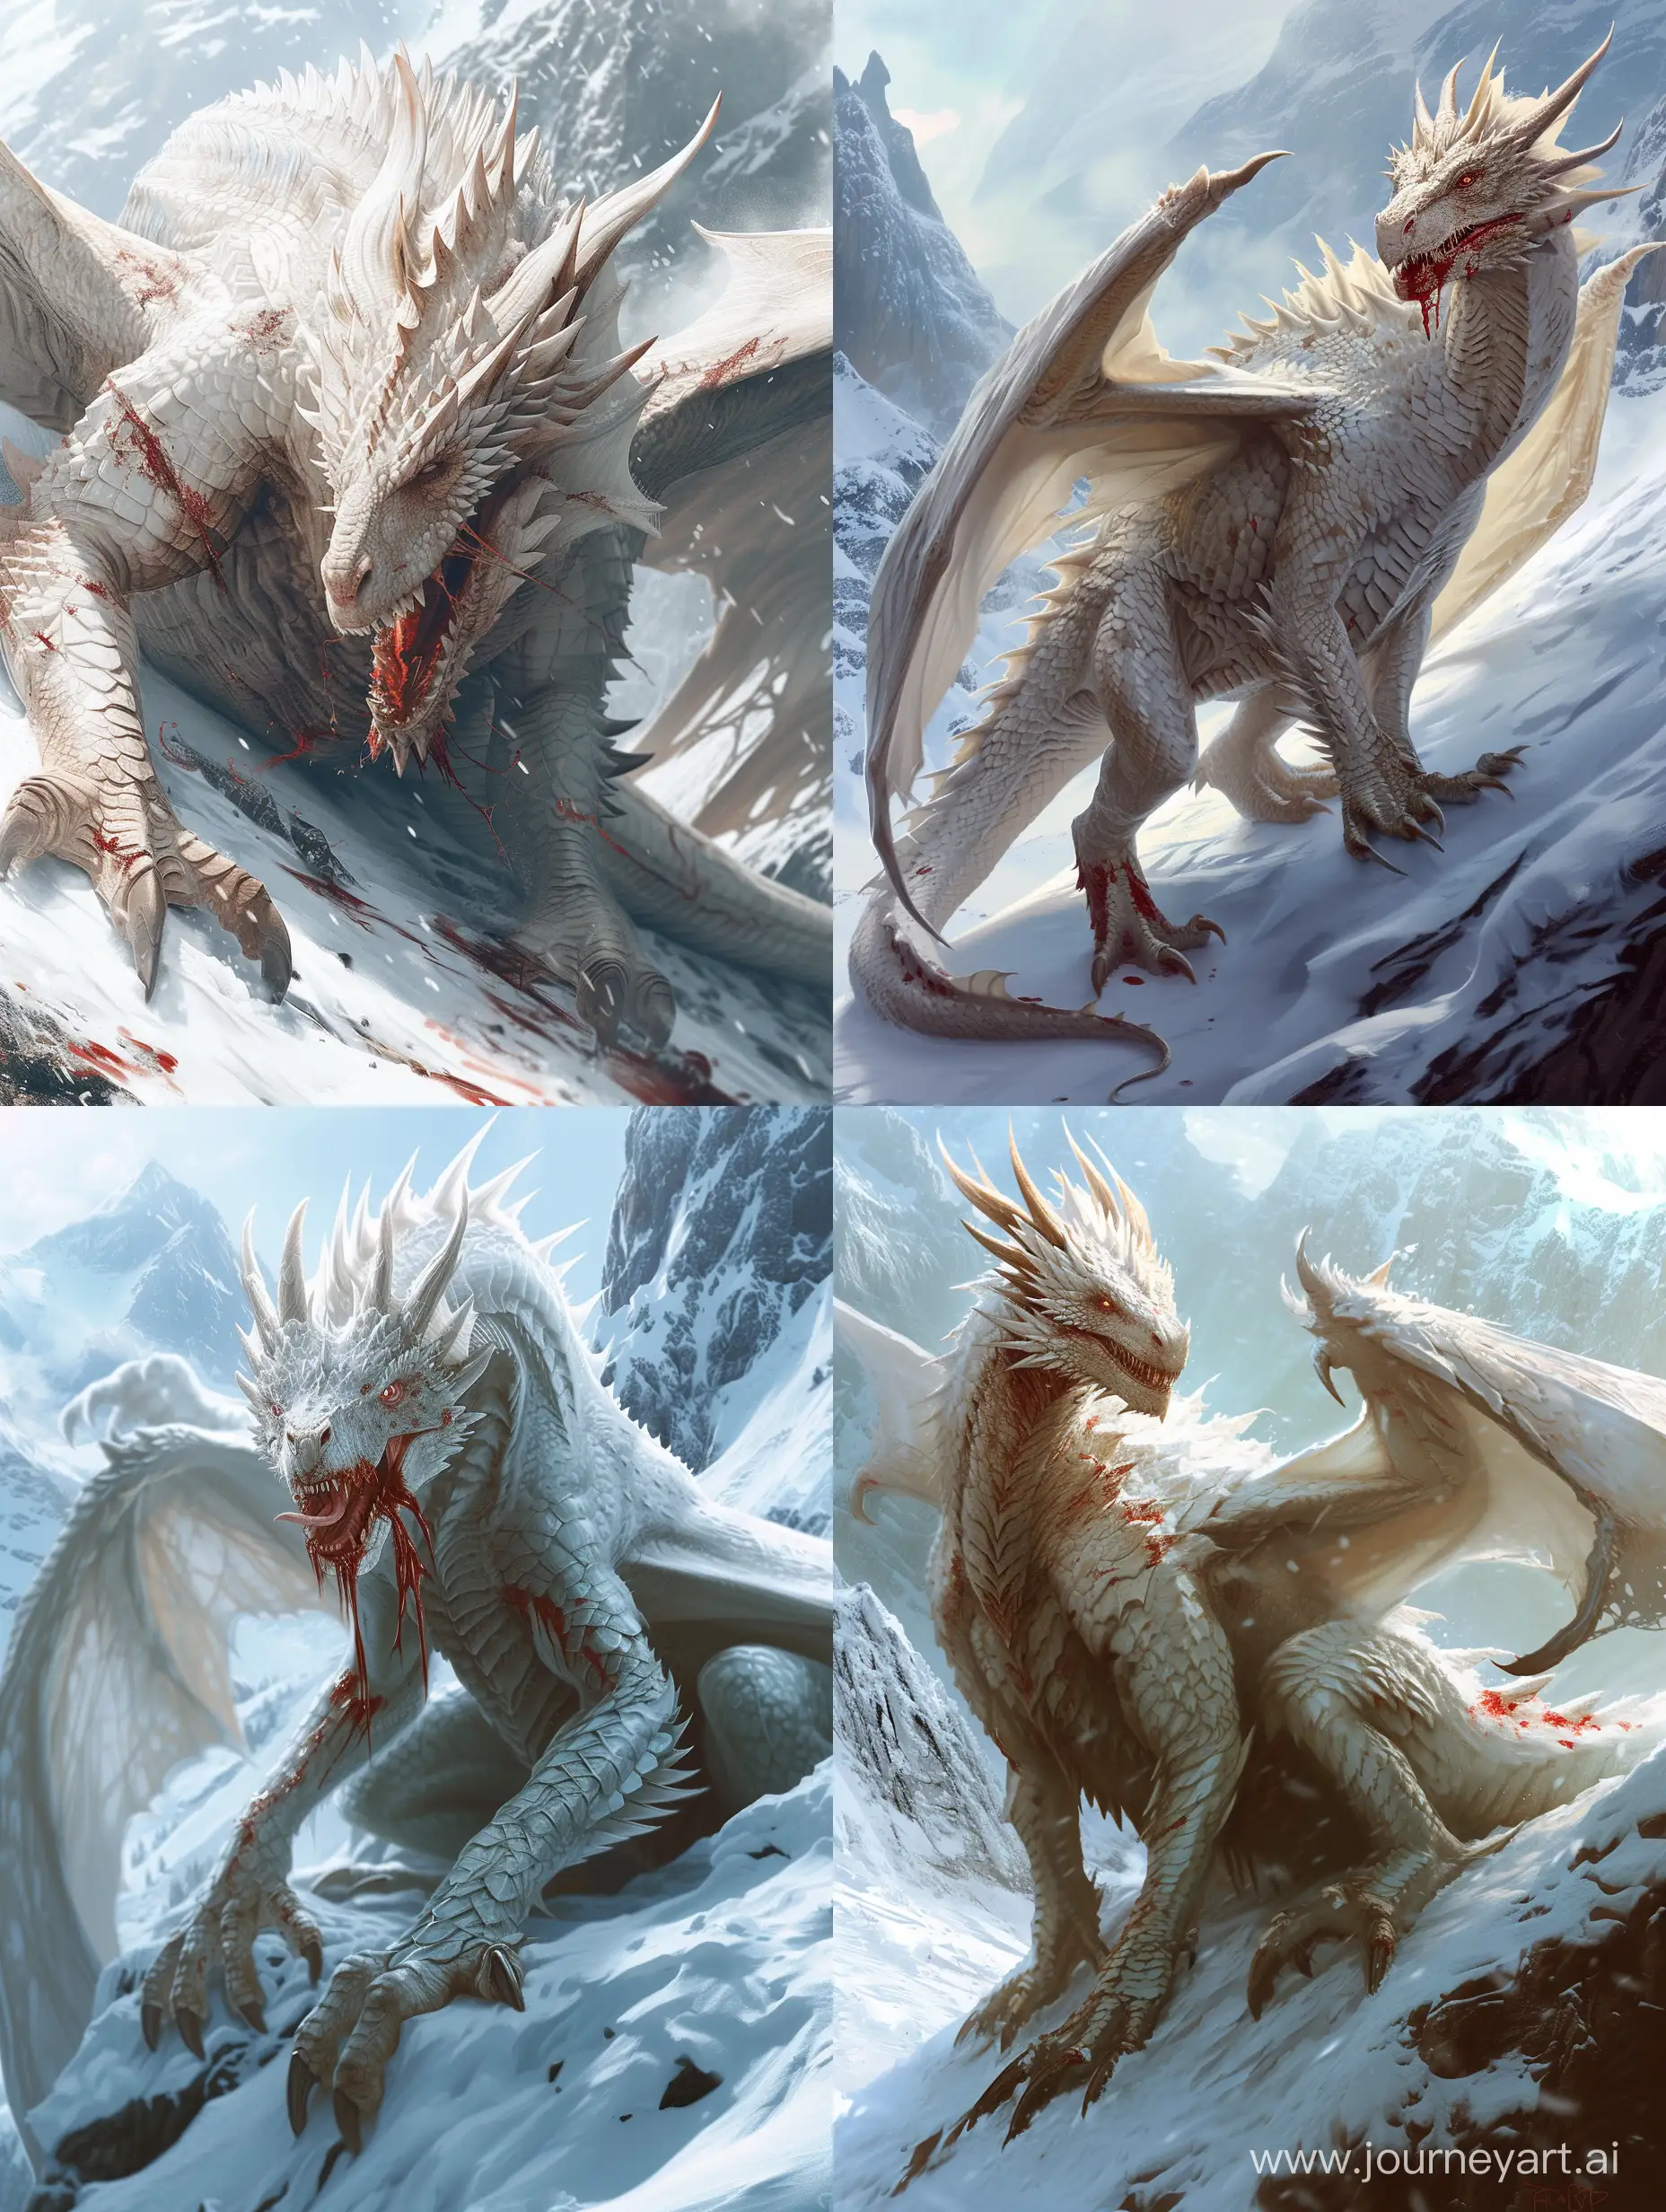 A huge maned white dragon with scales and blades on its back on 
snowy mountain,The most stubborn dragon among its kind,snow,blood,intricate,incredible detail,warm light,terrifying.